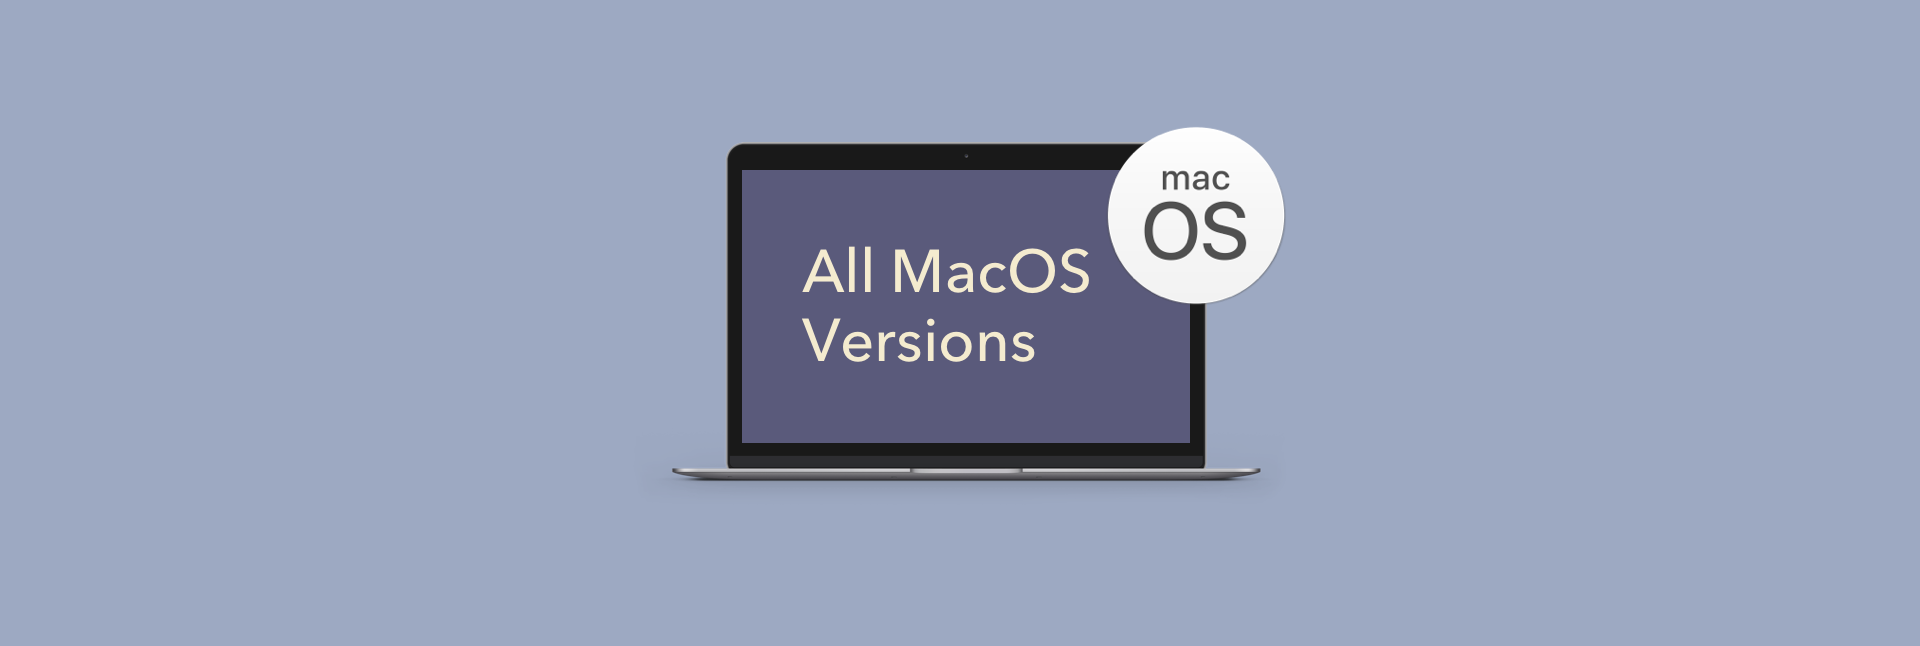 newest mac os version number